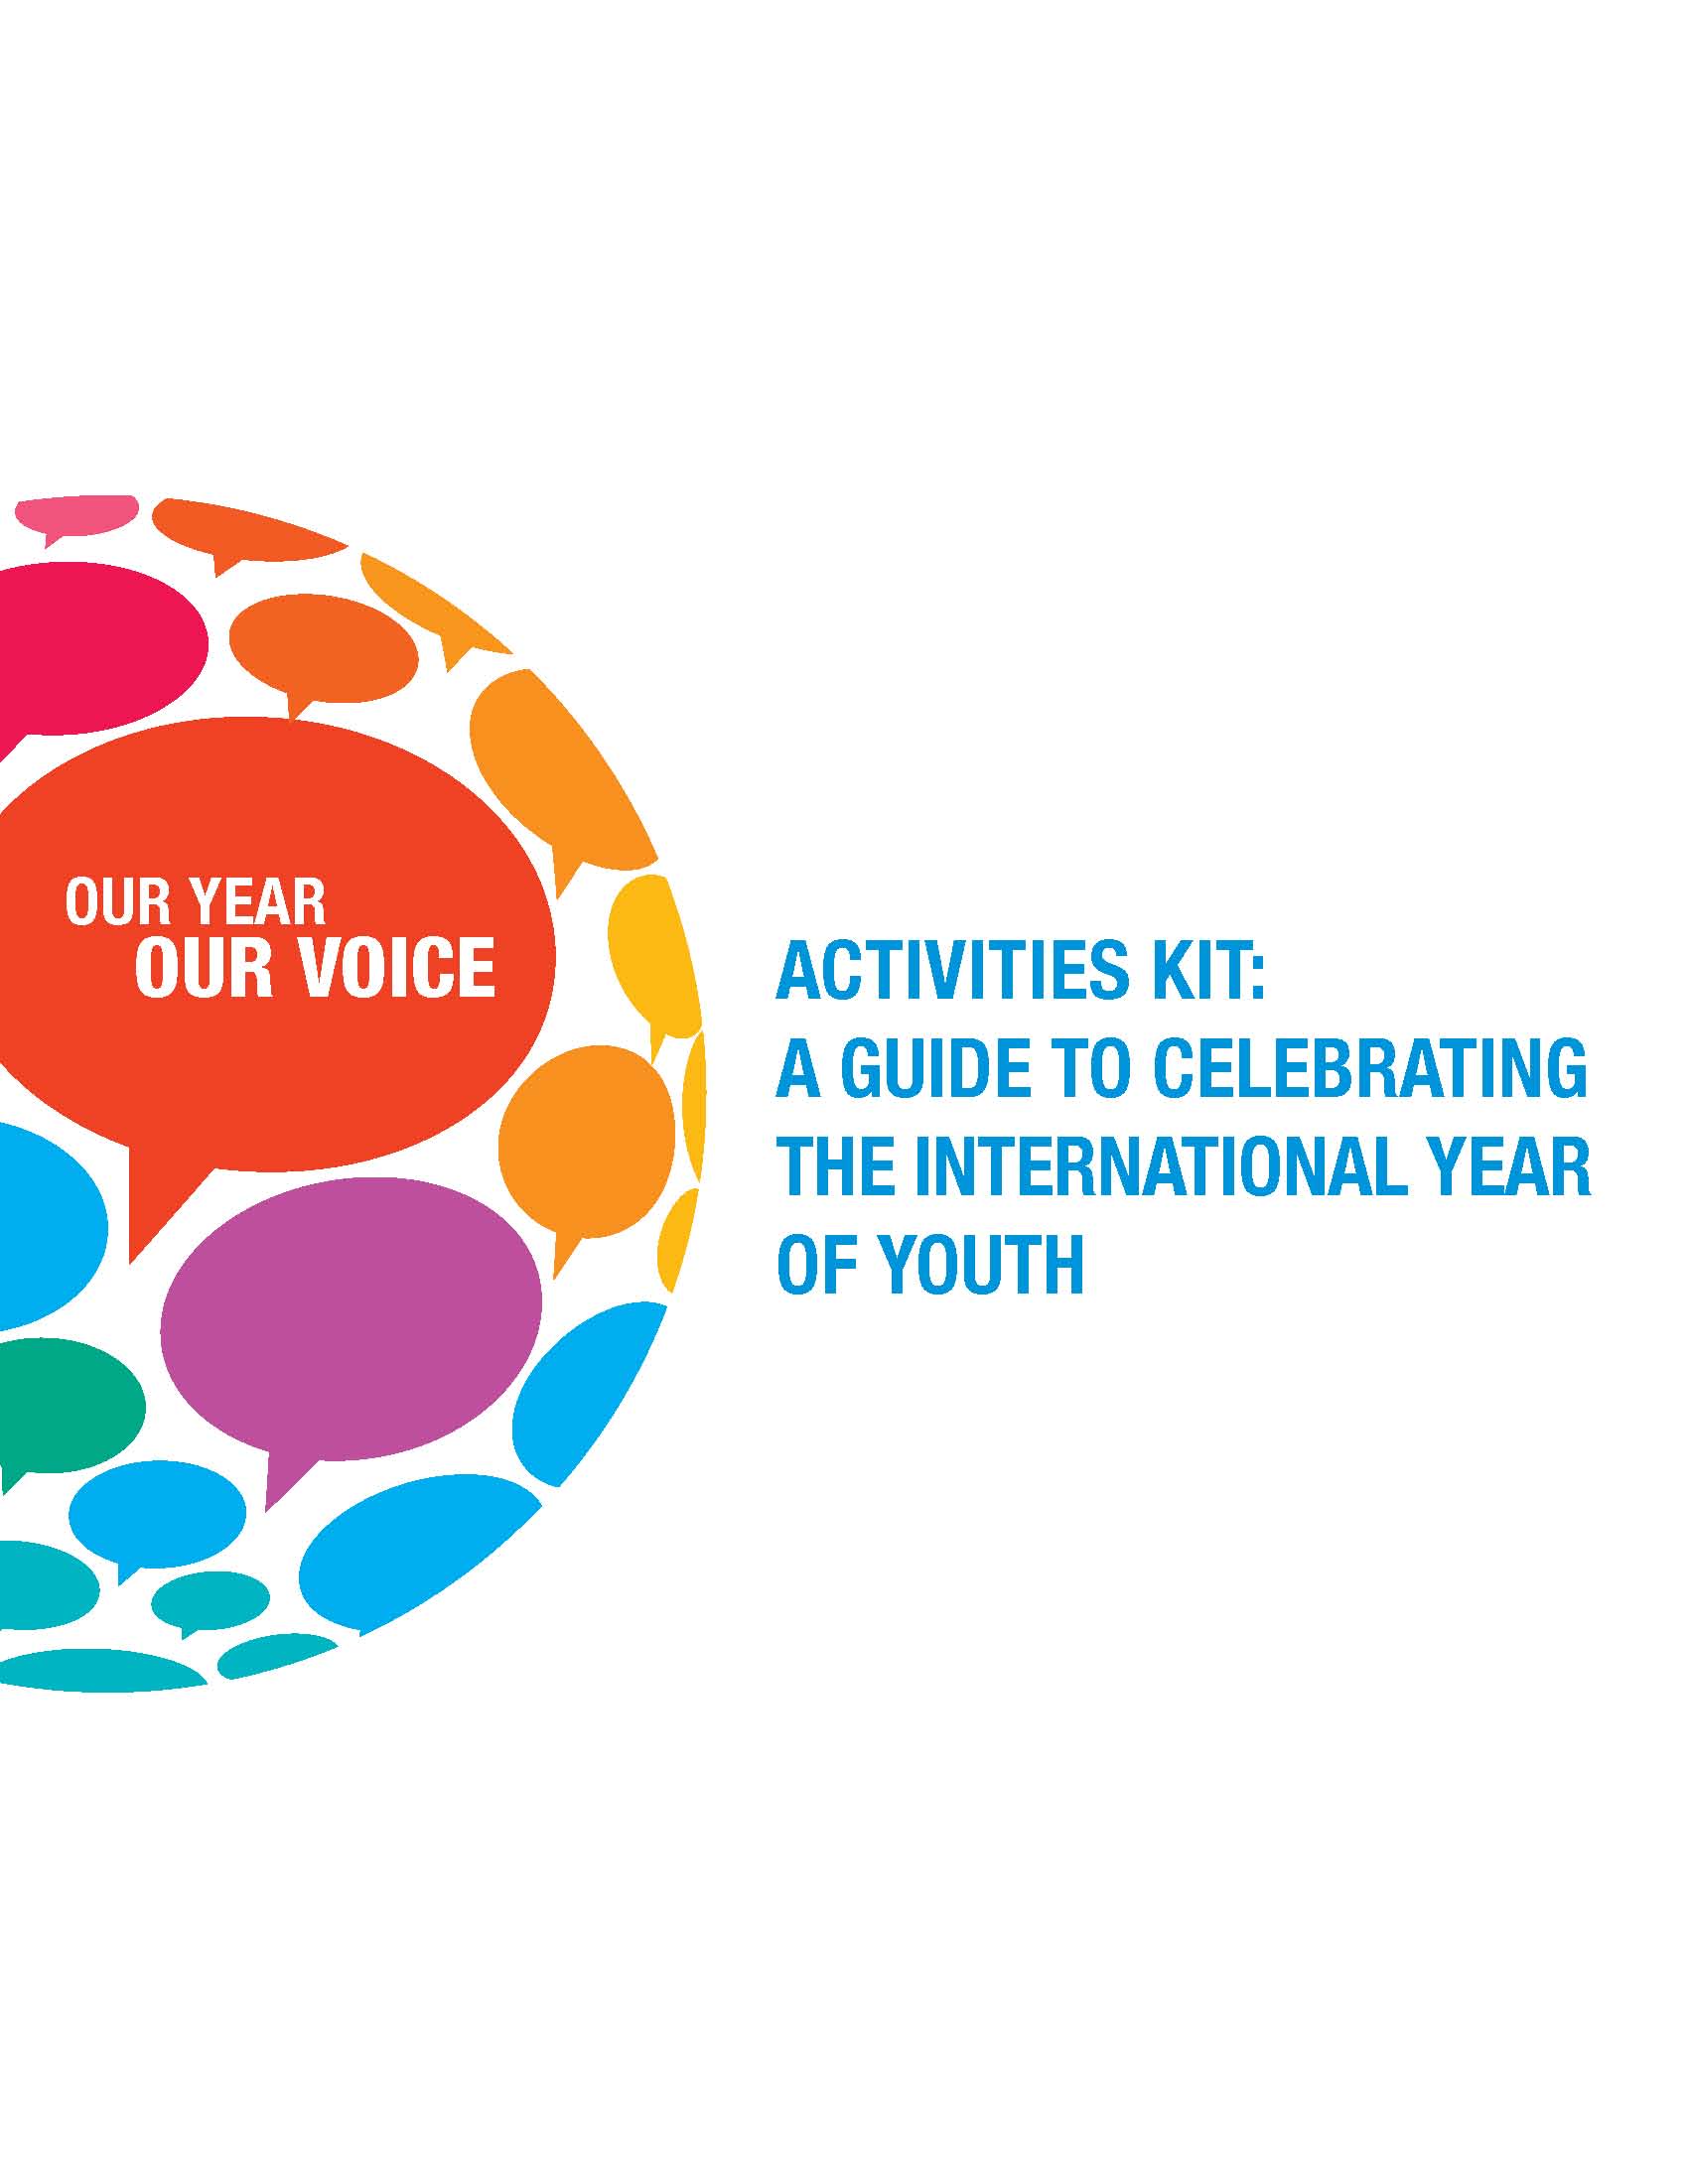 Activities Kit: A Guide to celebrating the International Year of Youth